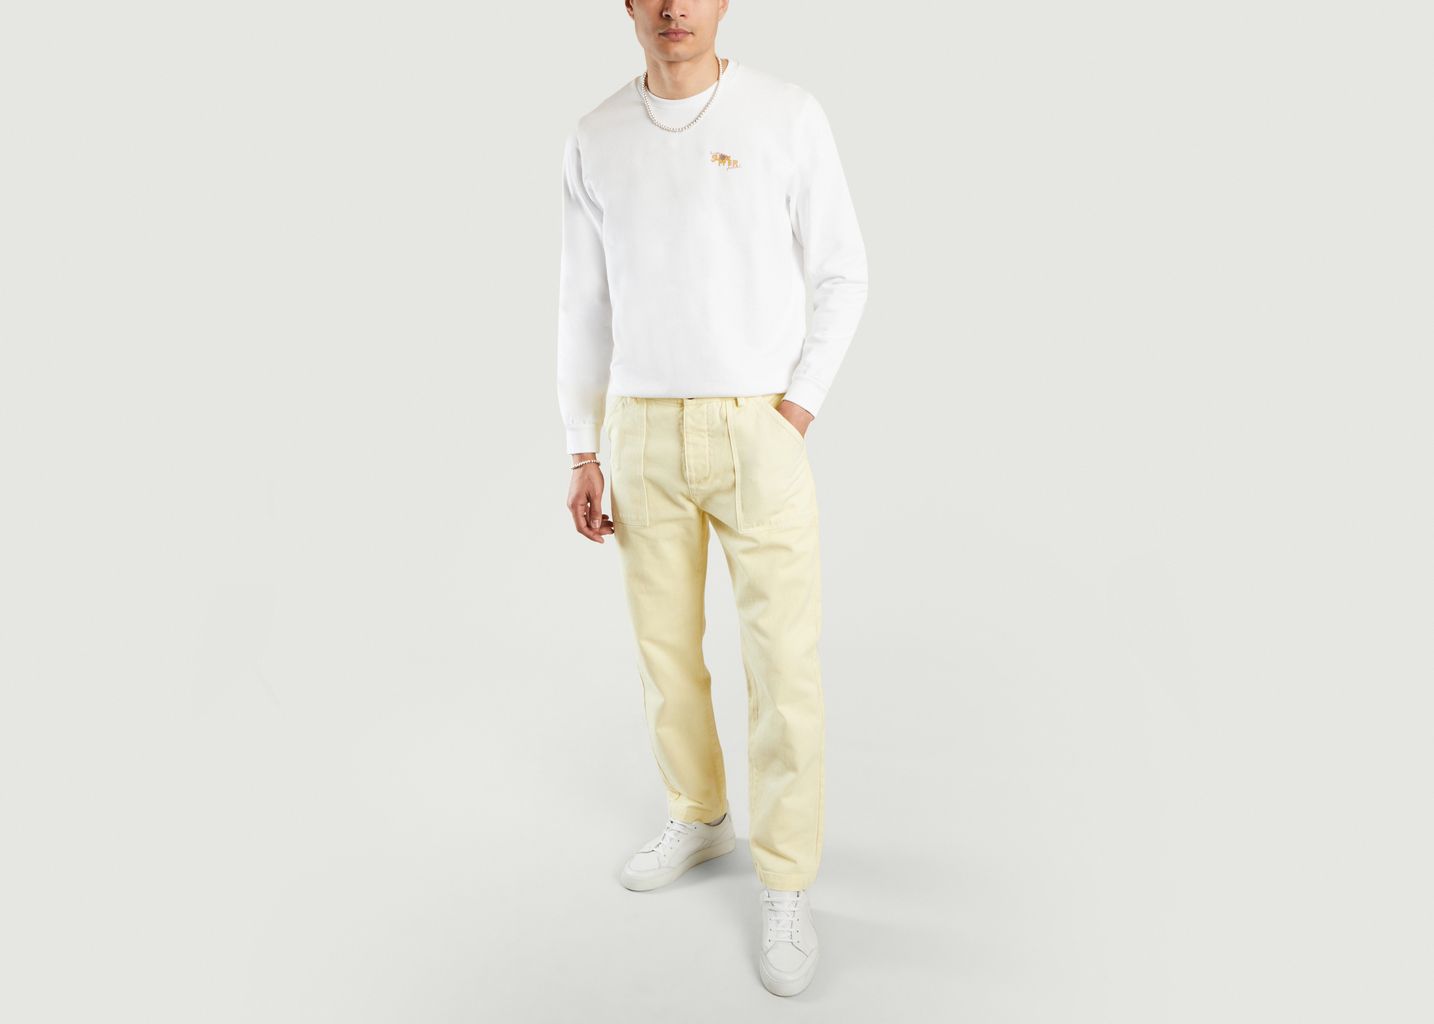 Fitted organic cotton chino pants with pockets - Cuisse de Grenouille